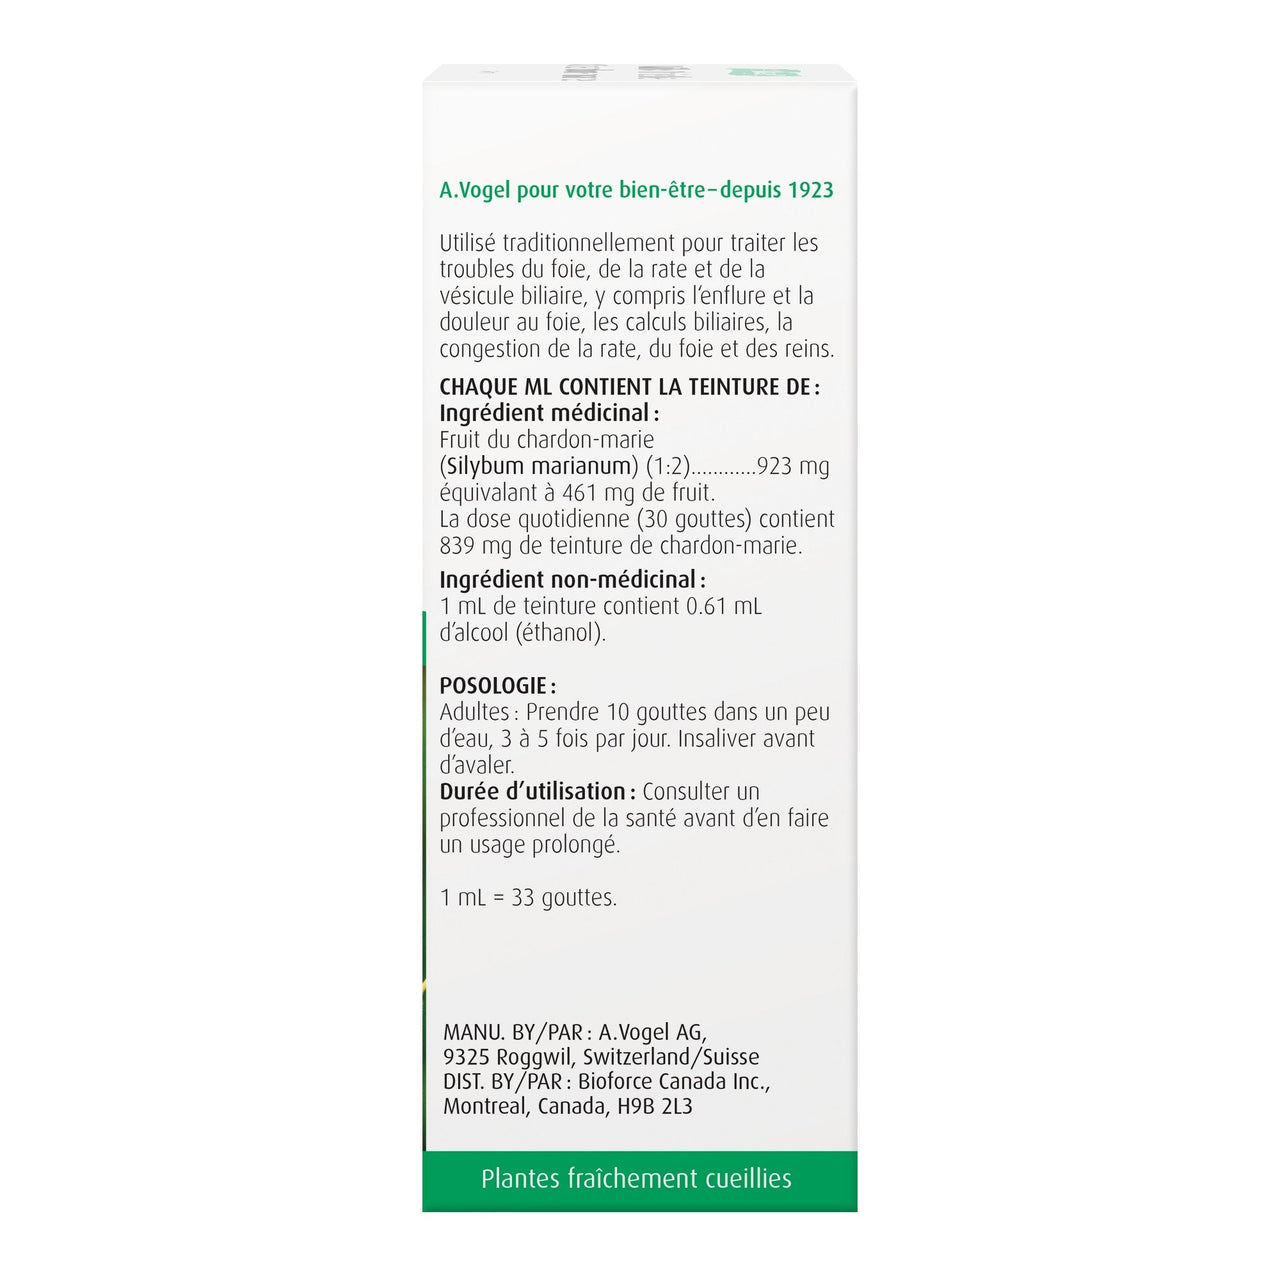 A. Vogel Milk Thistle Extract 50mL - Nutrition Plus